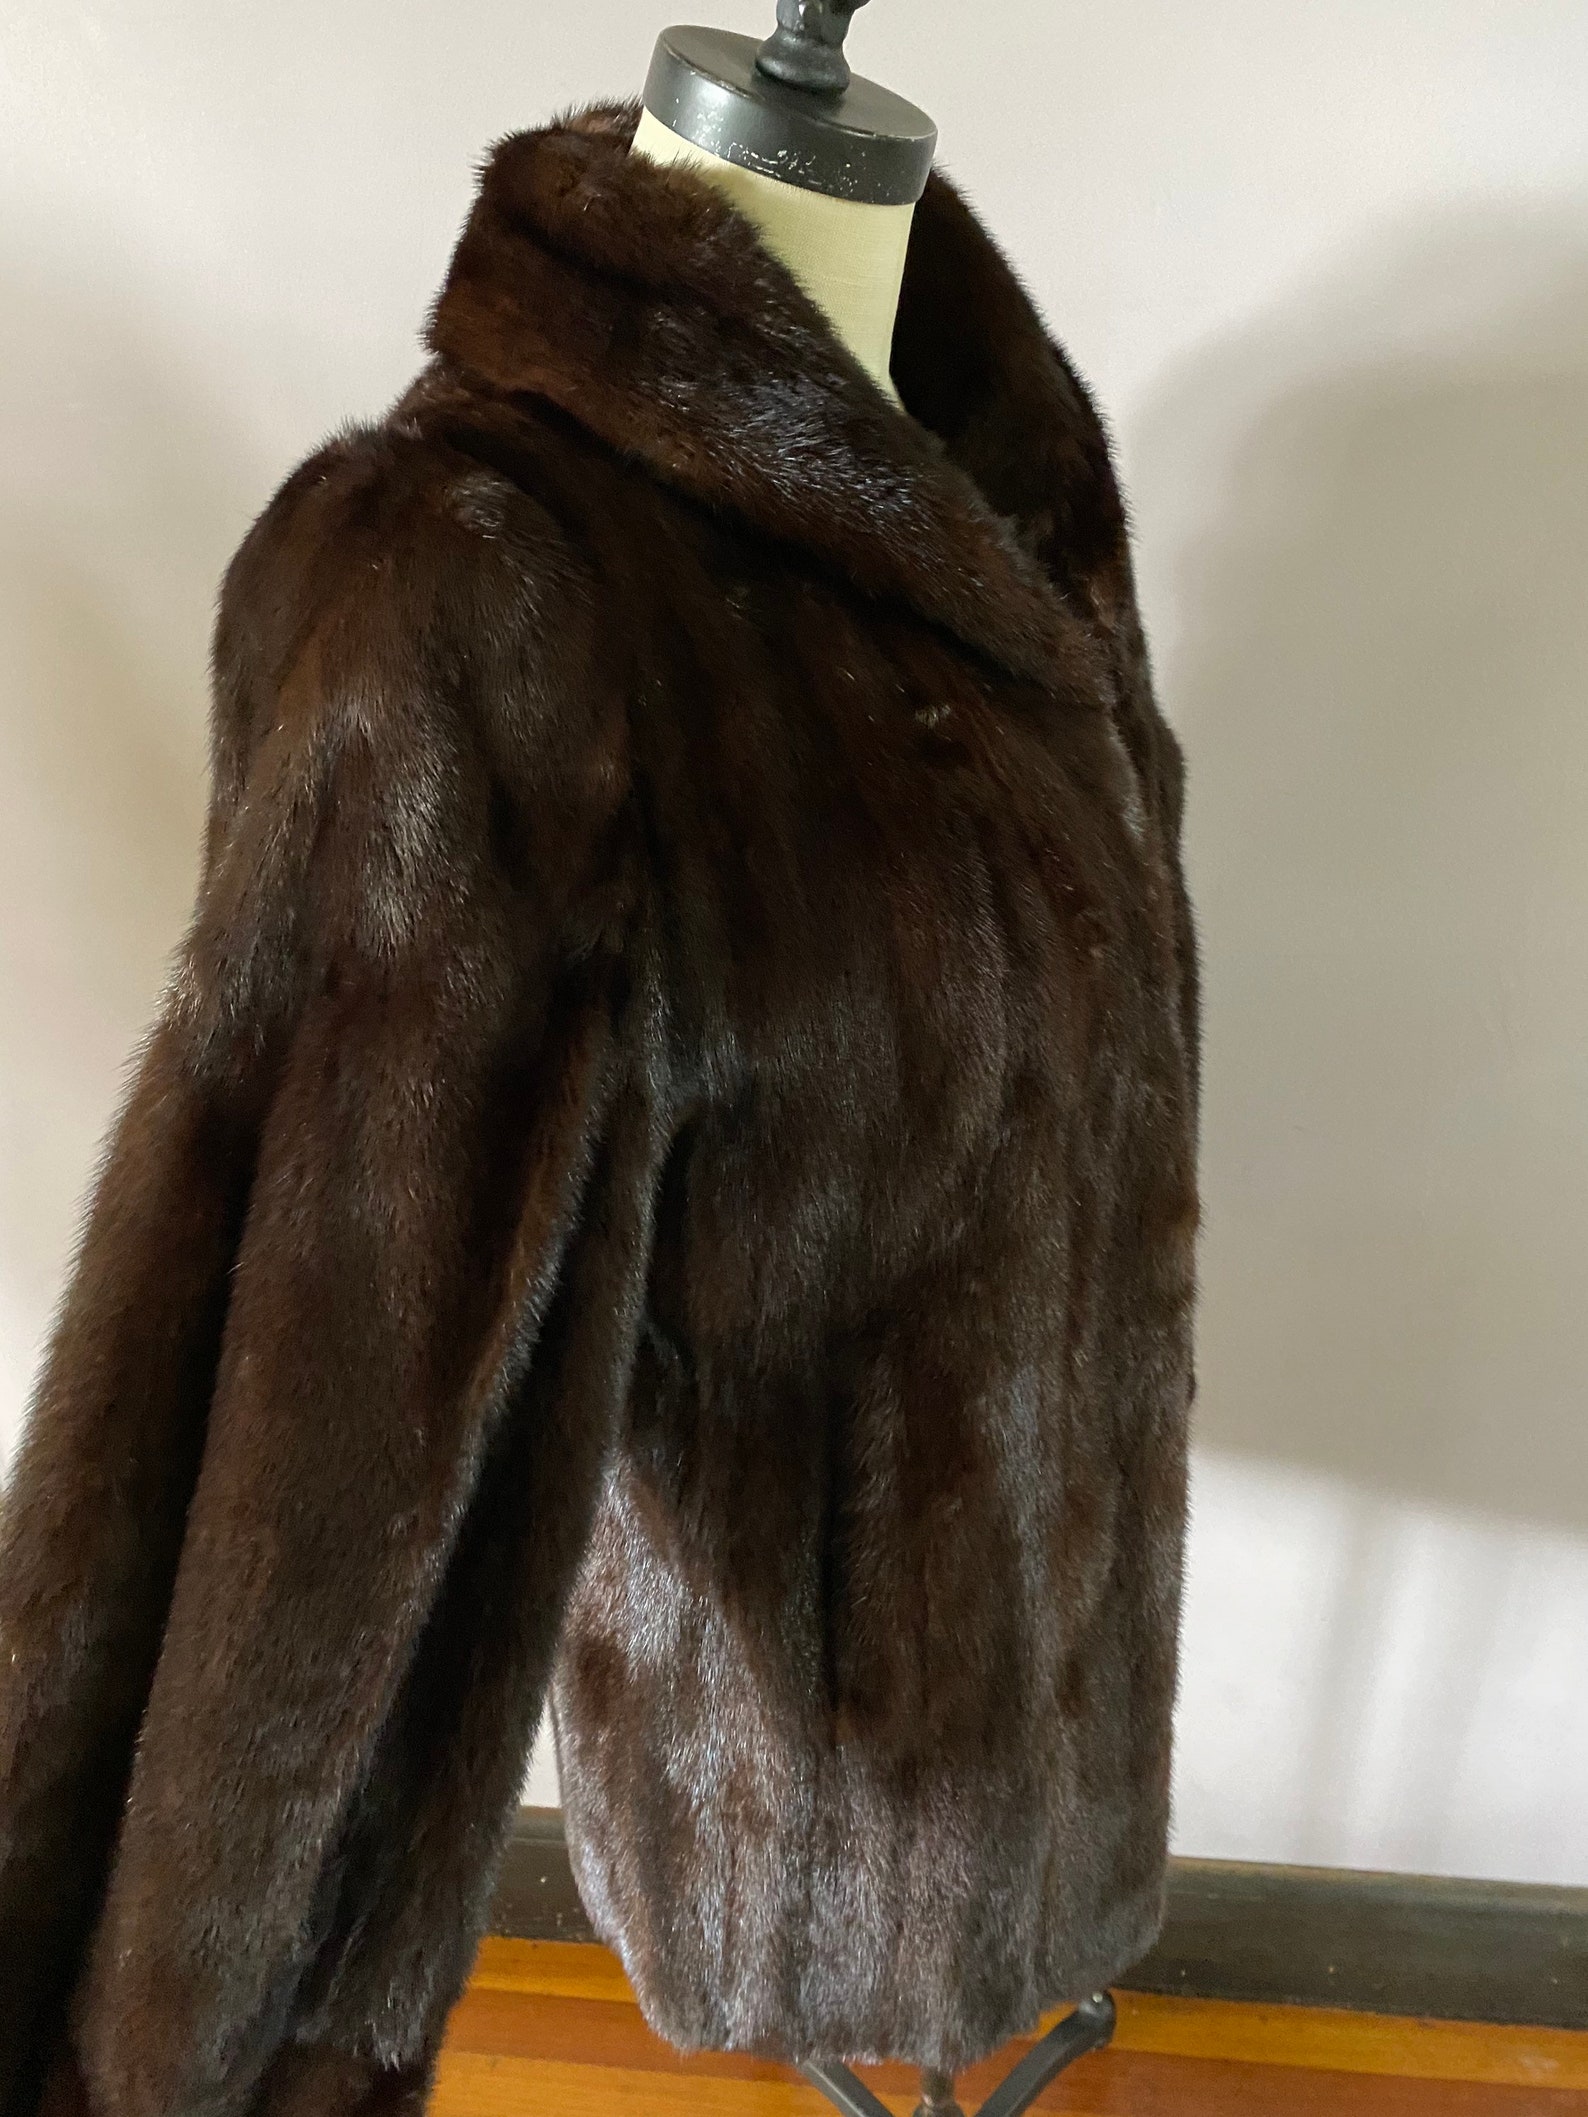 Custom Mink Coat in Perfect Condition. Size Small. - Etsy